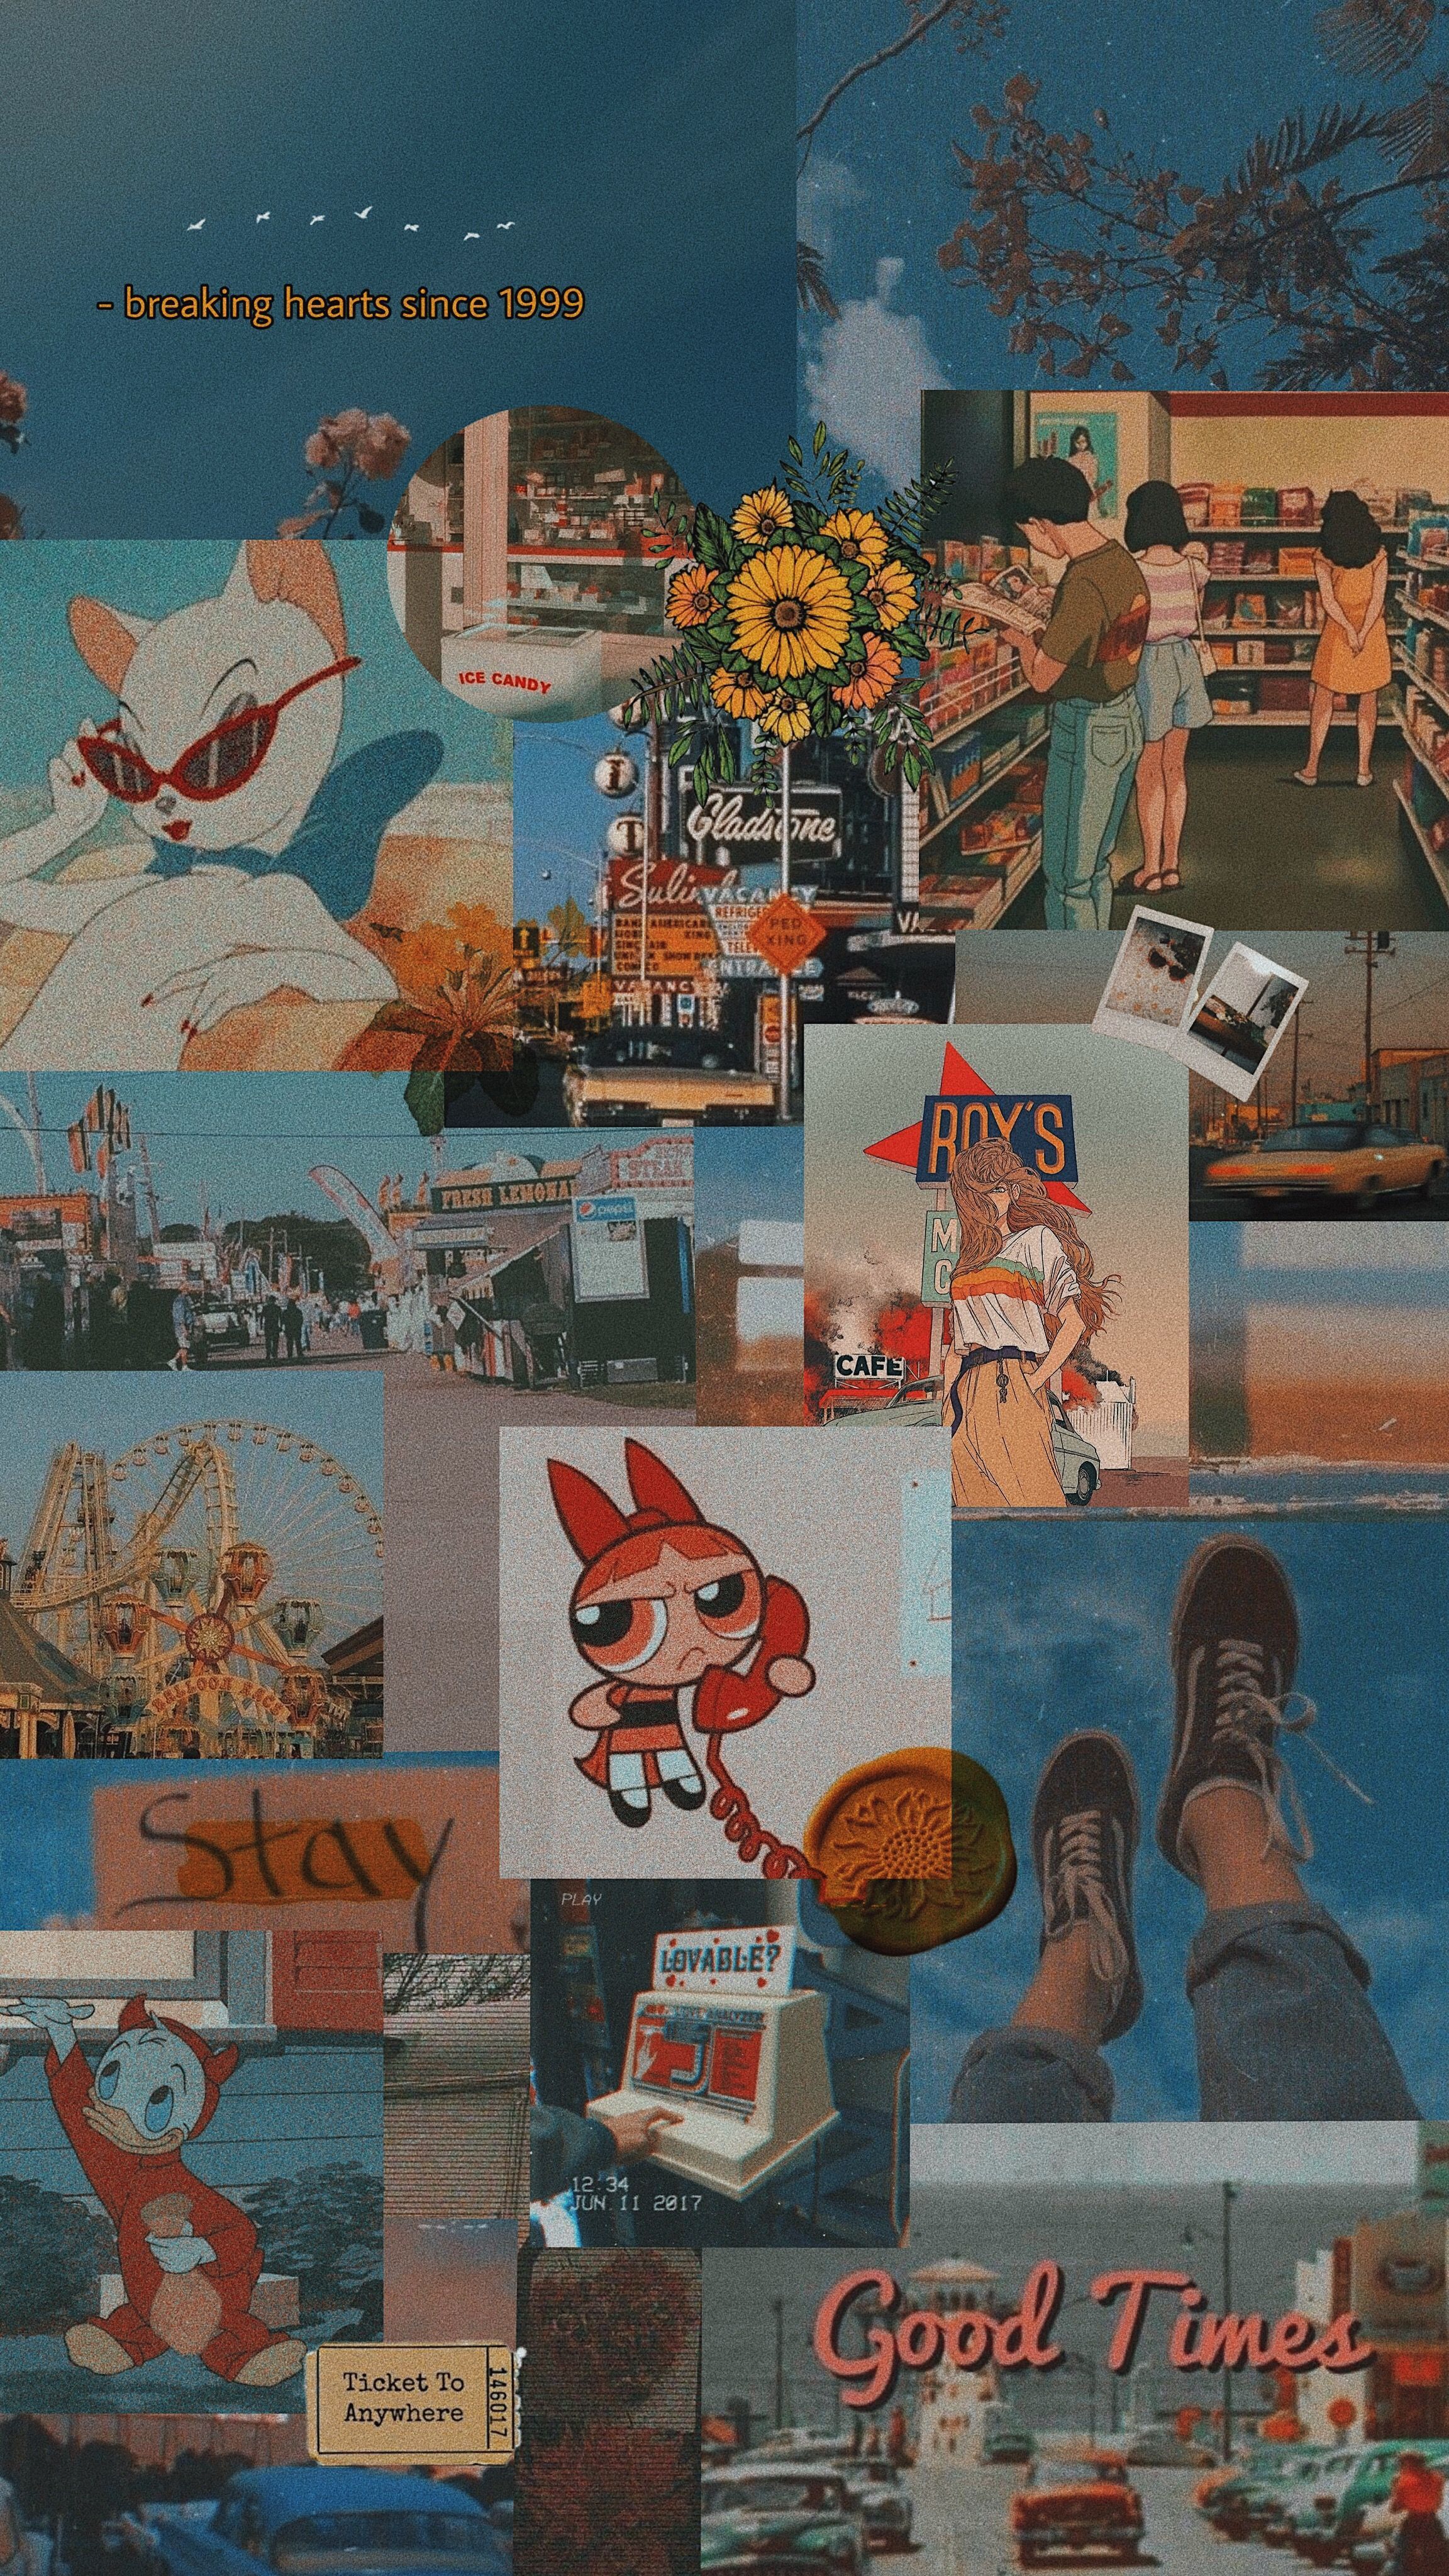 A collage of various pictures, including a cartoon character, flowers, a ferris wheel, and a person wearing sneakers. - Vintage, 60s, retro, 80s, 50s